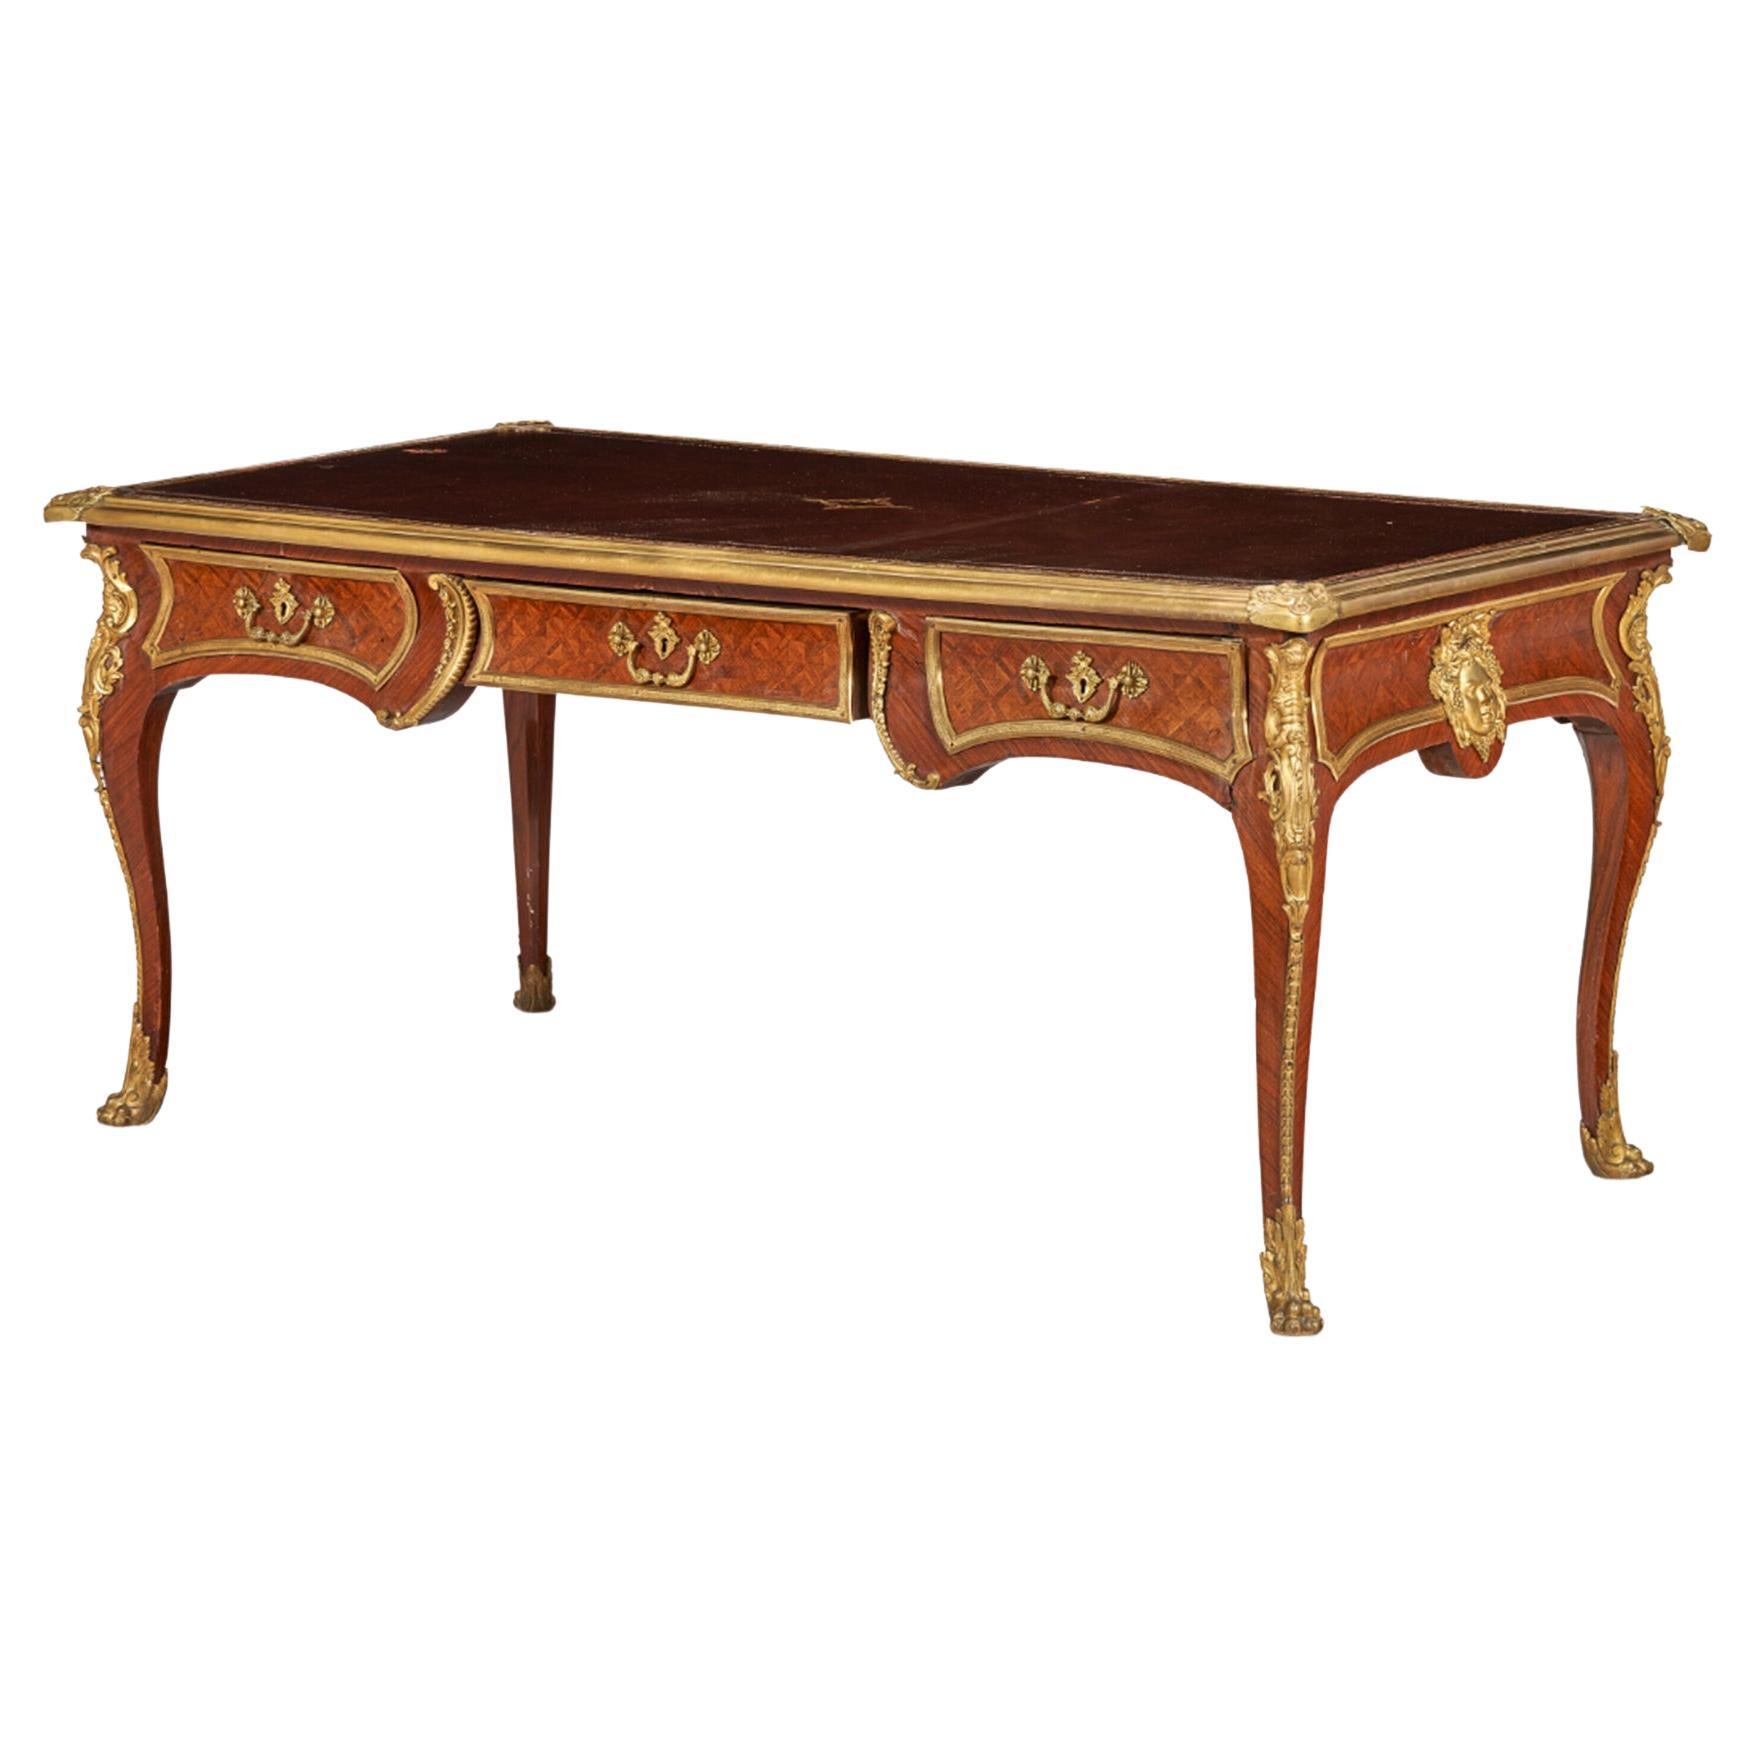 French Ormolu Mounted Bacchus Desk with Bureau Parquetry All in Tulipwood